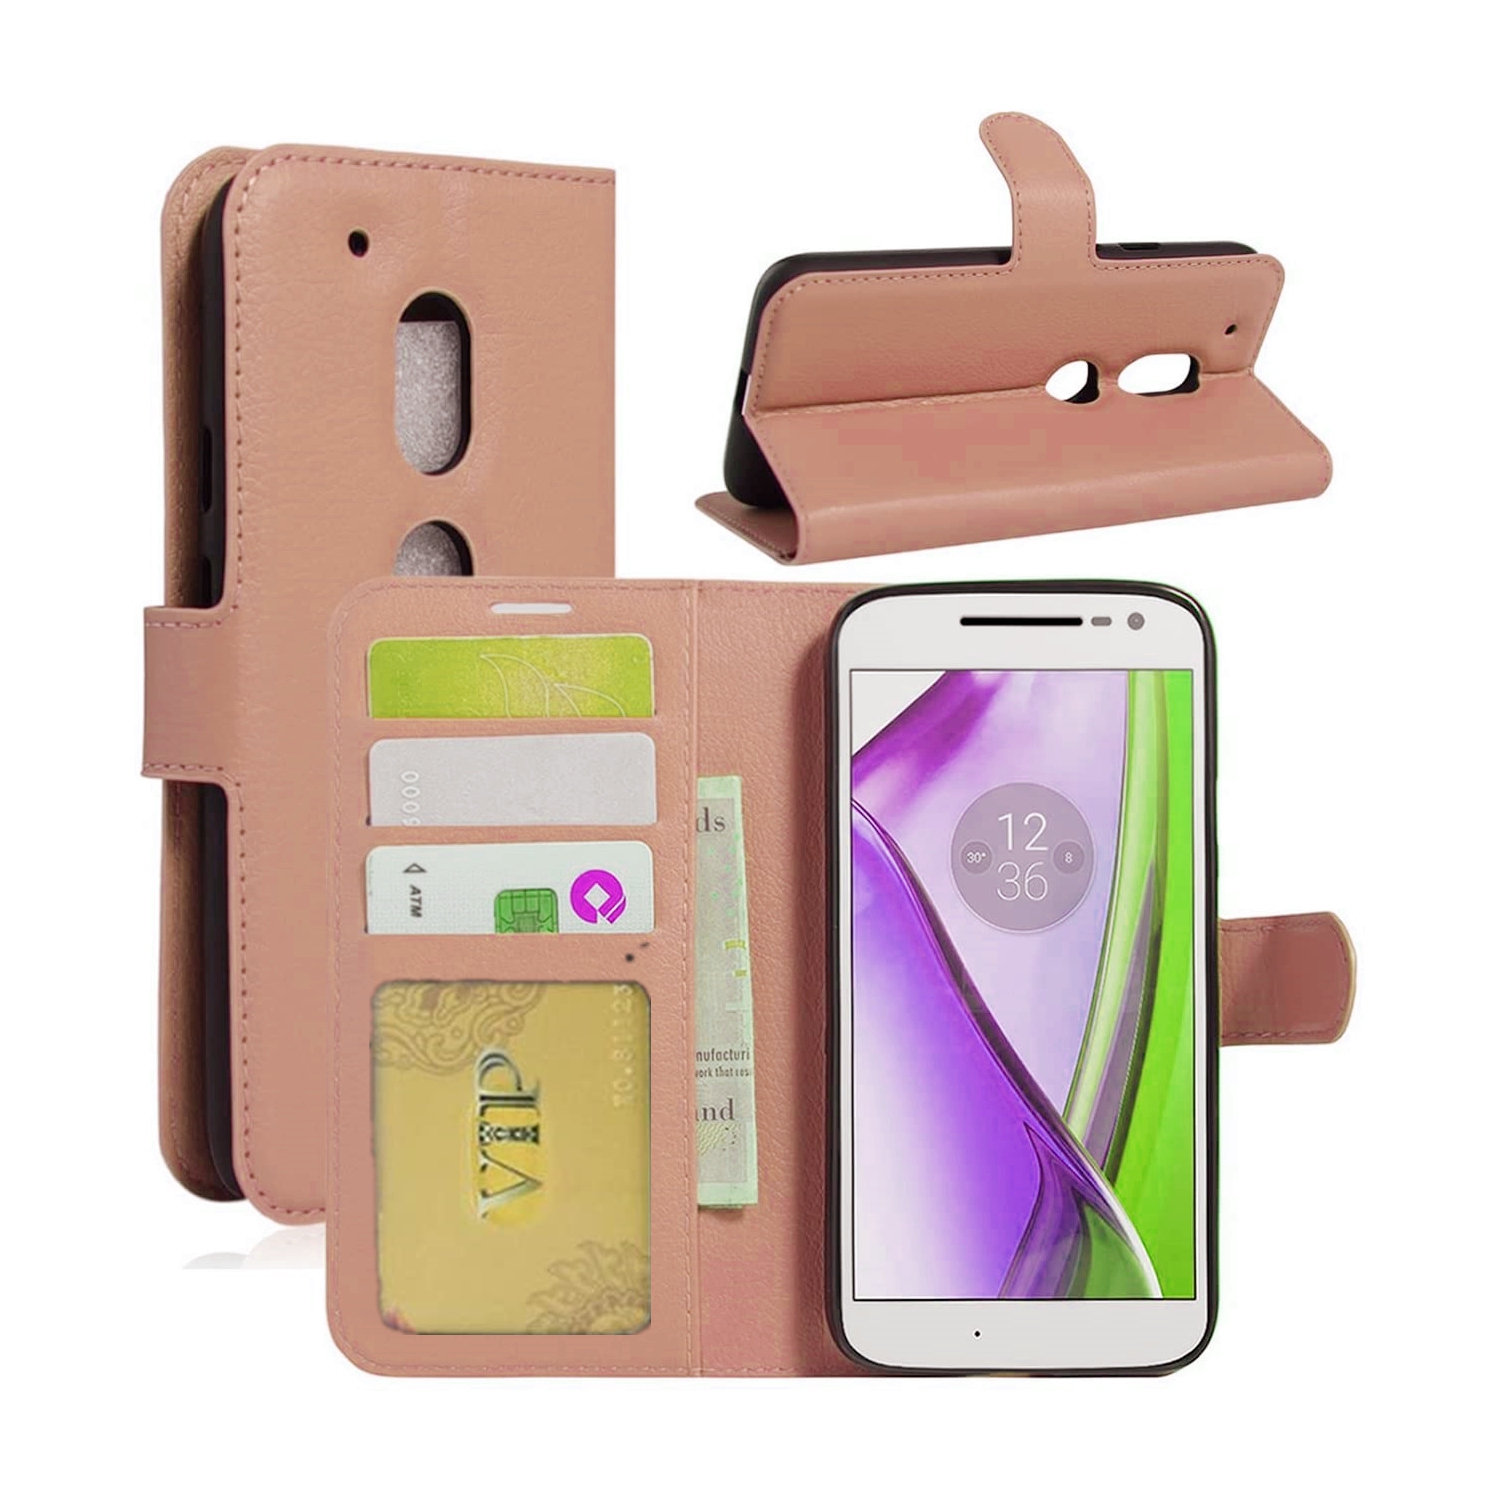 [CS] Motorola Moto G6 Play Case, Magnetic Leather Folio Wallet Flip Case Cover with Card Slot, Rose Gold